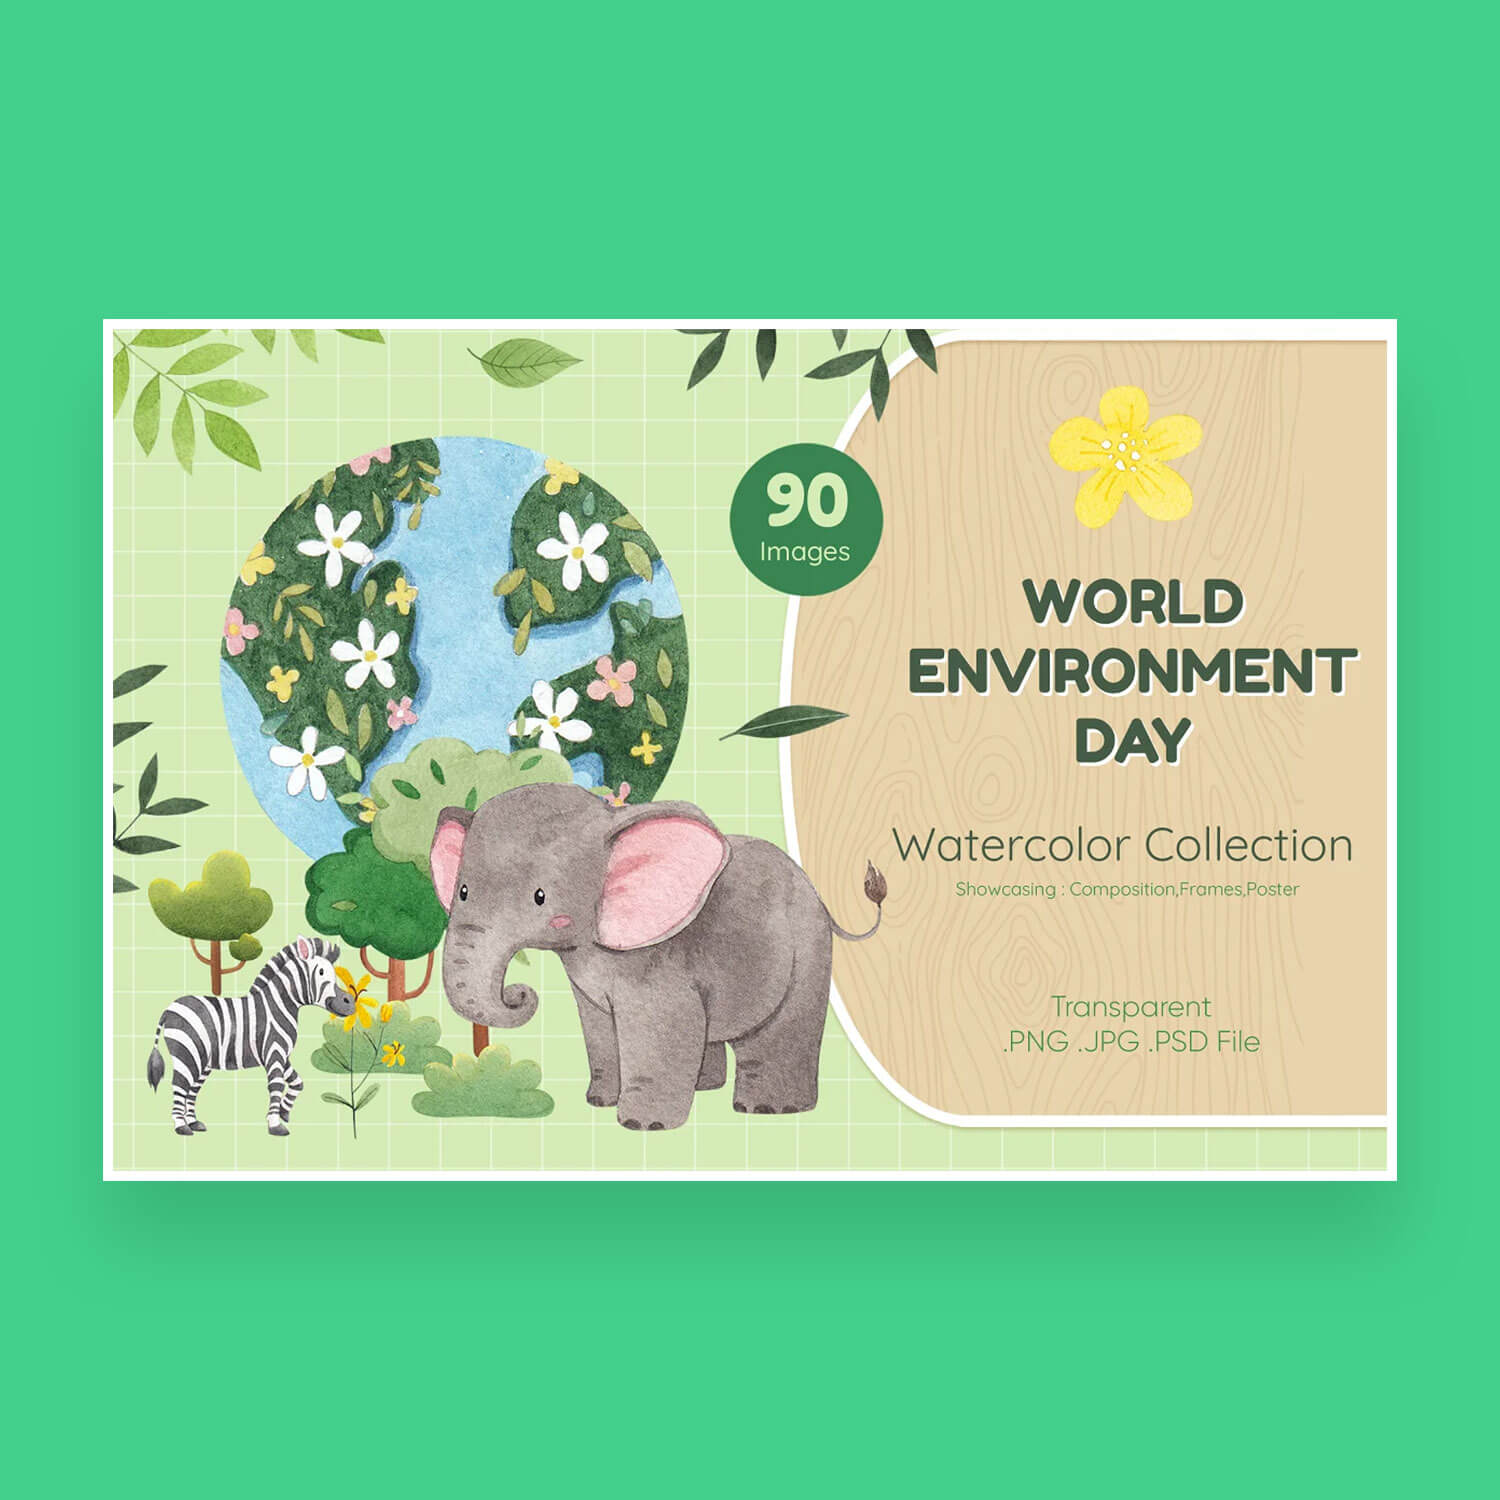 90 Images World Environment Day Watercolor Collection.